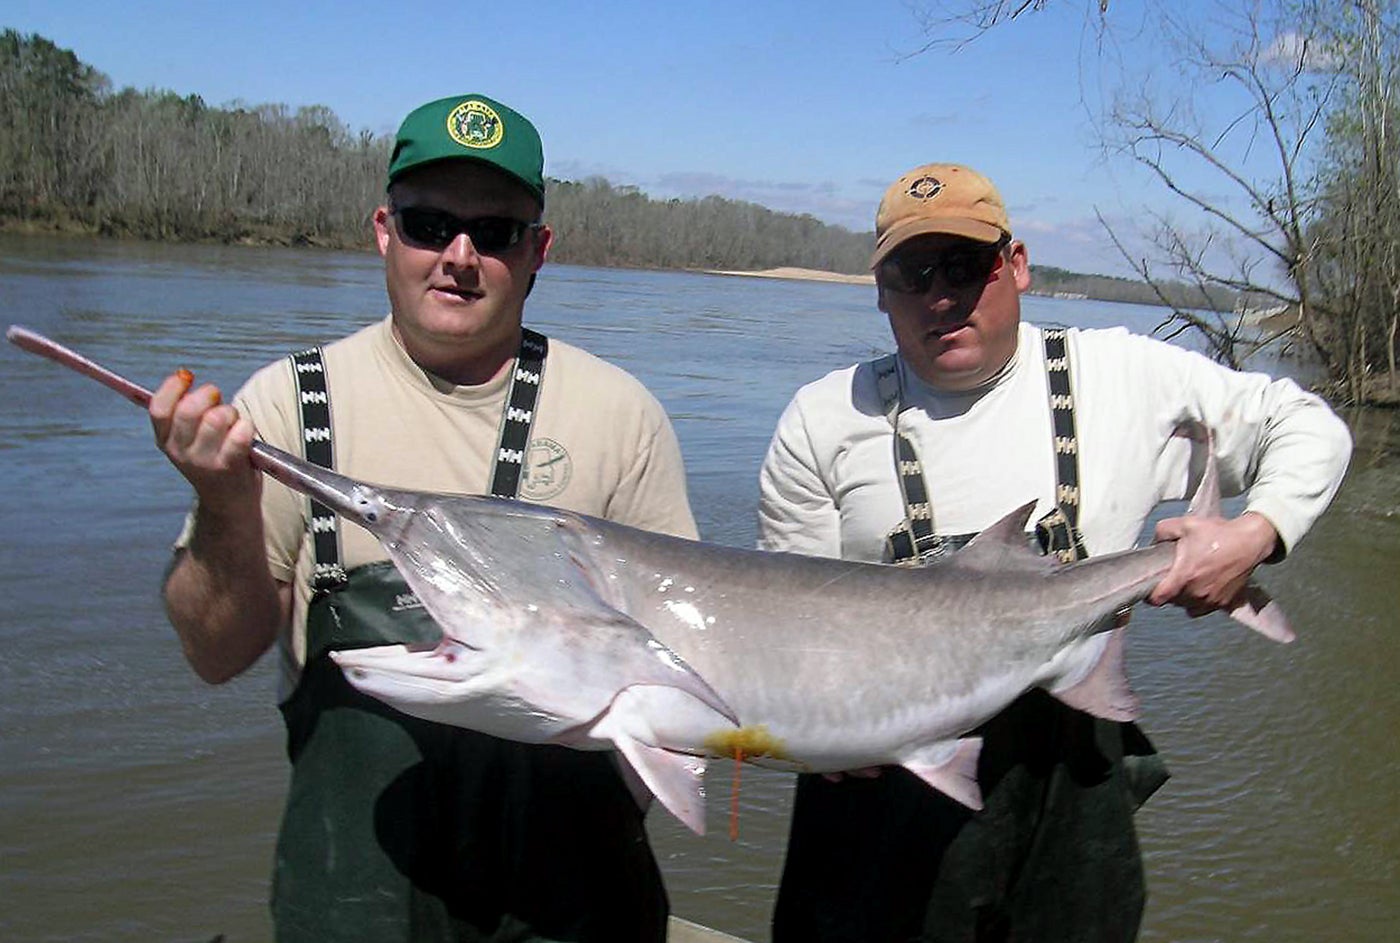 Steve Rider and Travis Powell with the WFF Fisheries Section display a paddlefish. This long-lived species is slow to mature and reproduce making it vulnerable to overharvest.